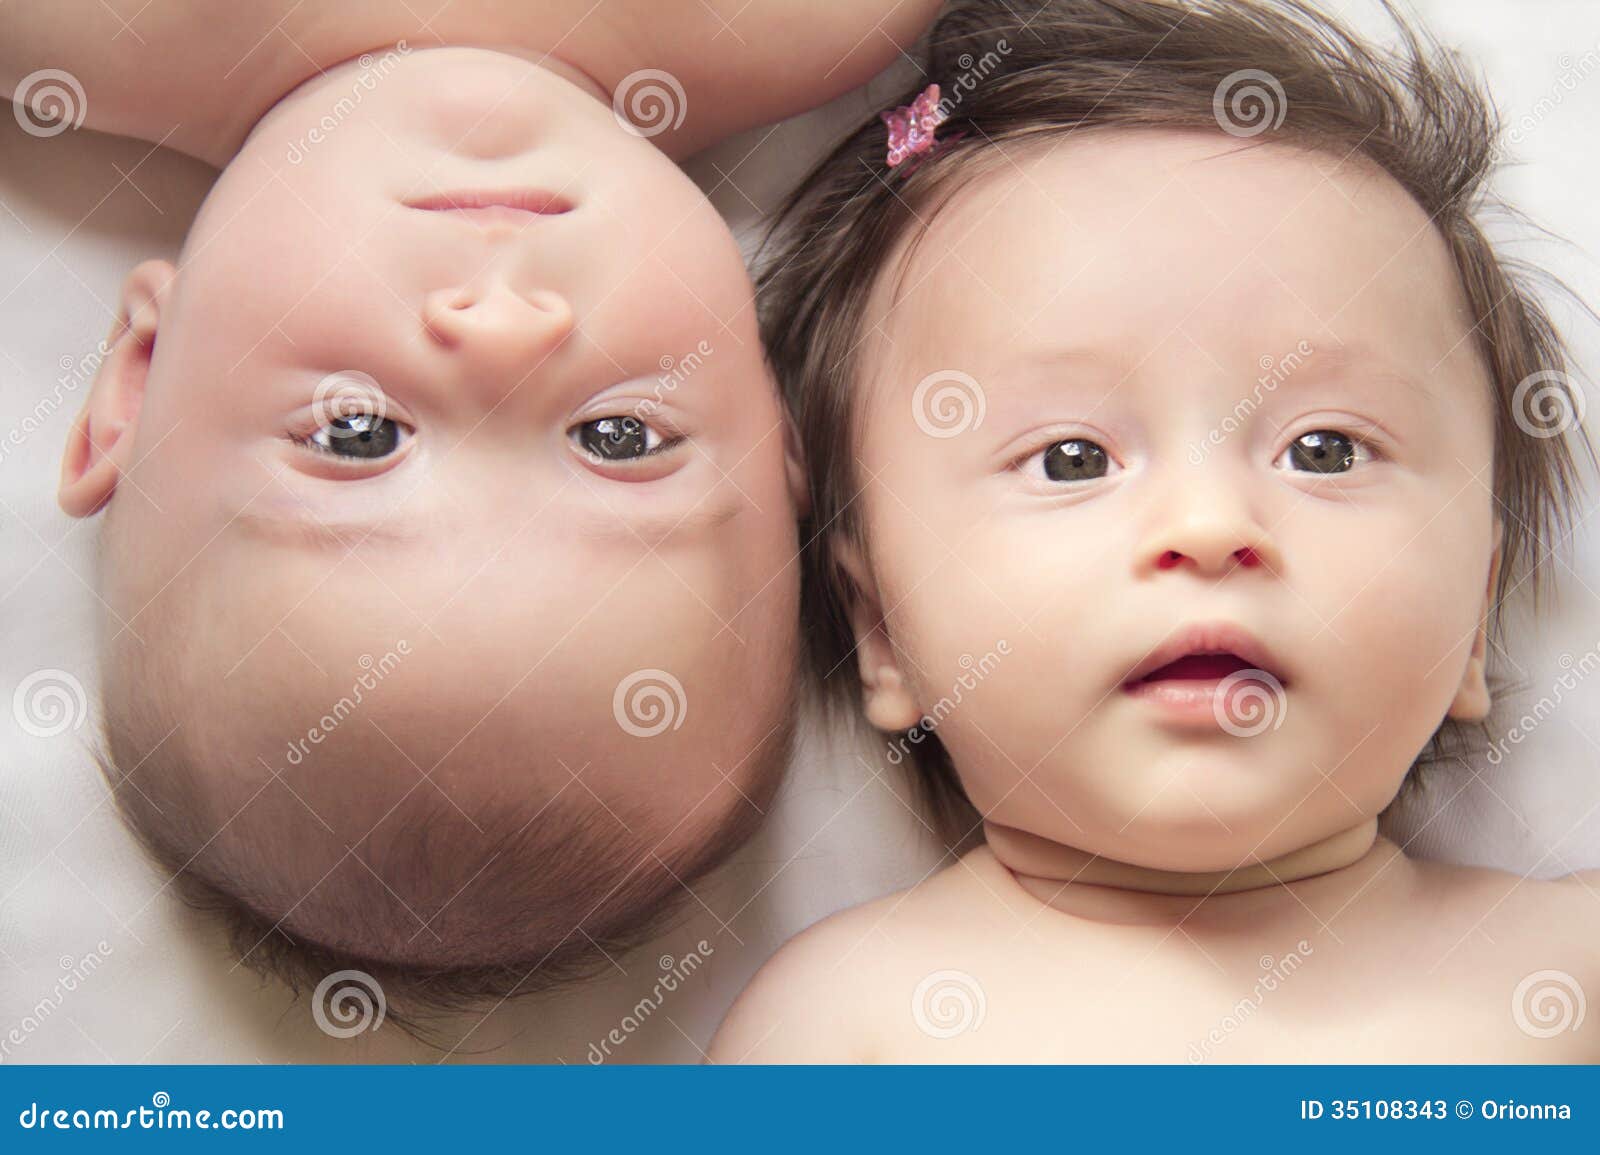 3 4 Cute Twins Boy Girl Photos Free Royalty Free Stock Photos From Dreamstime